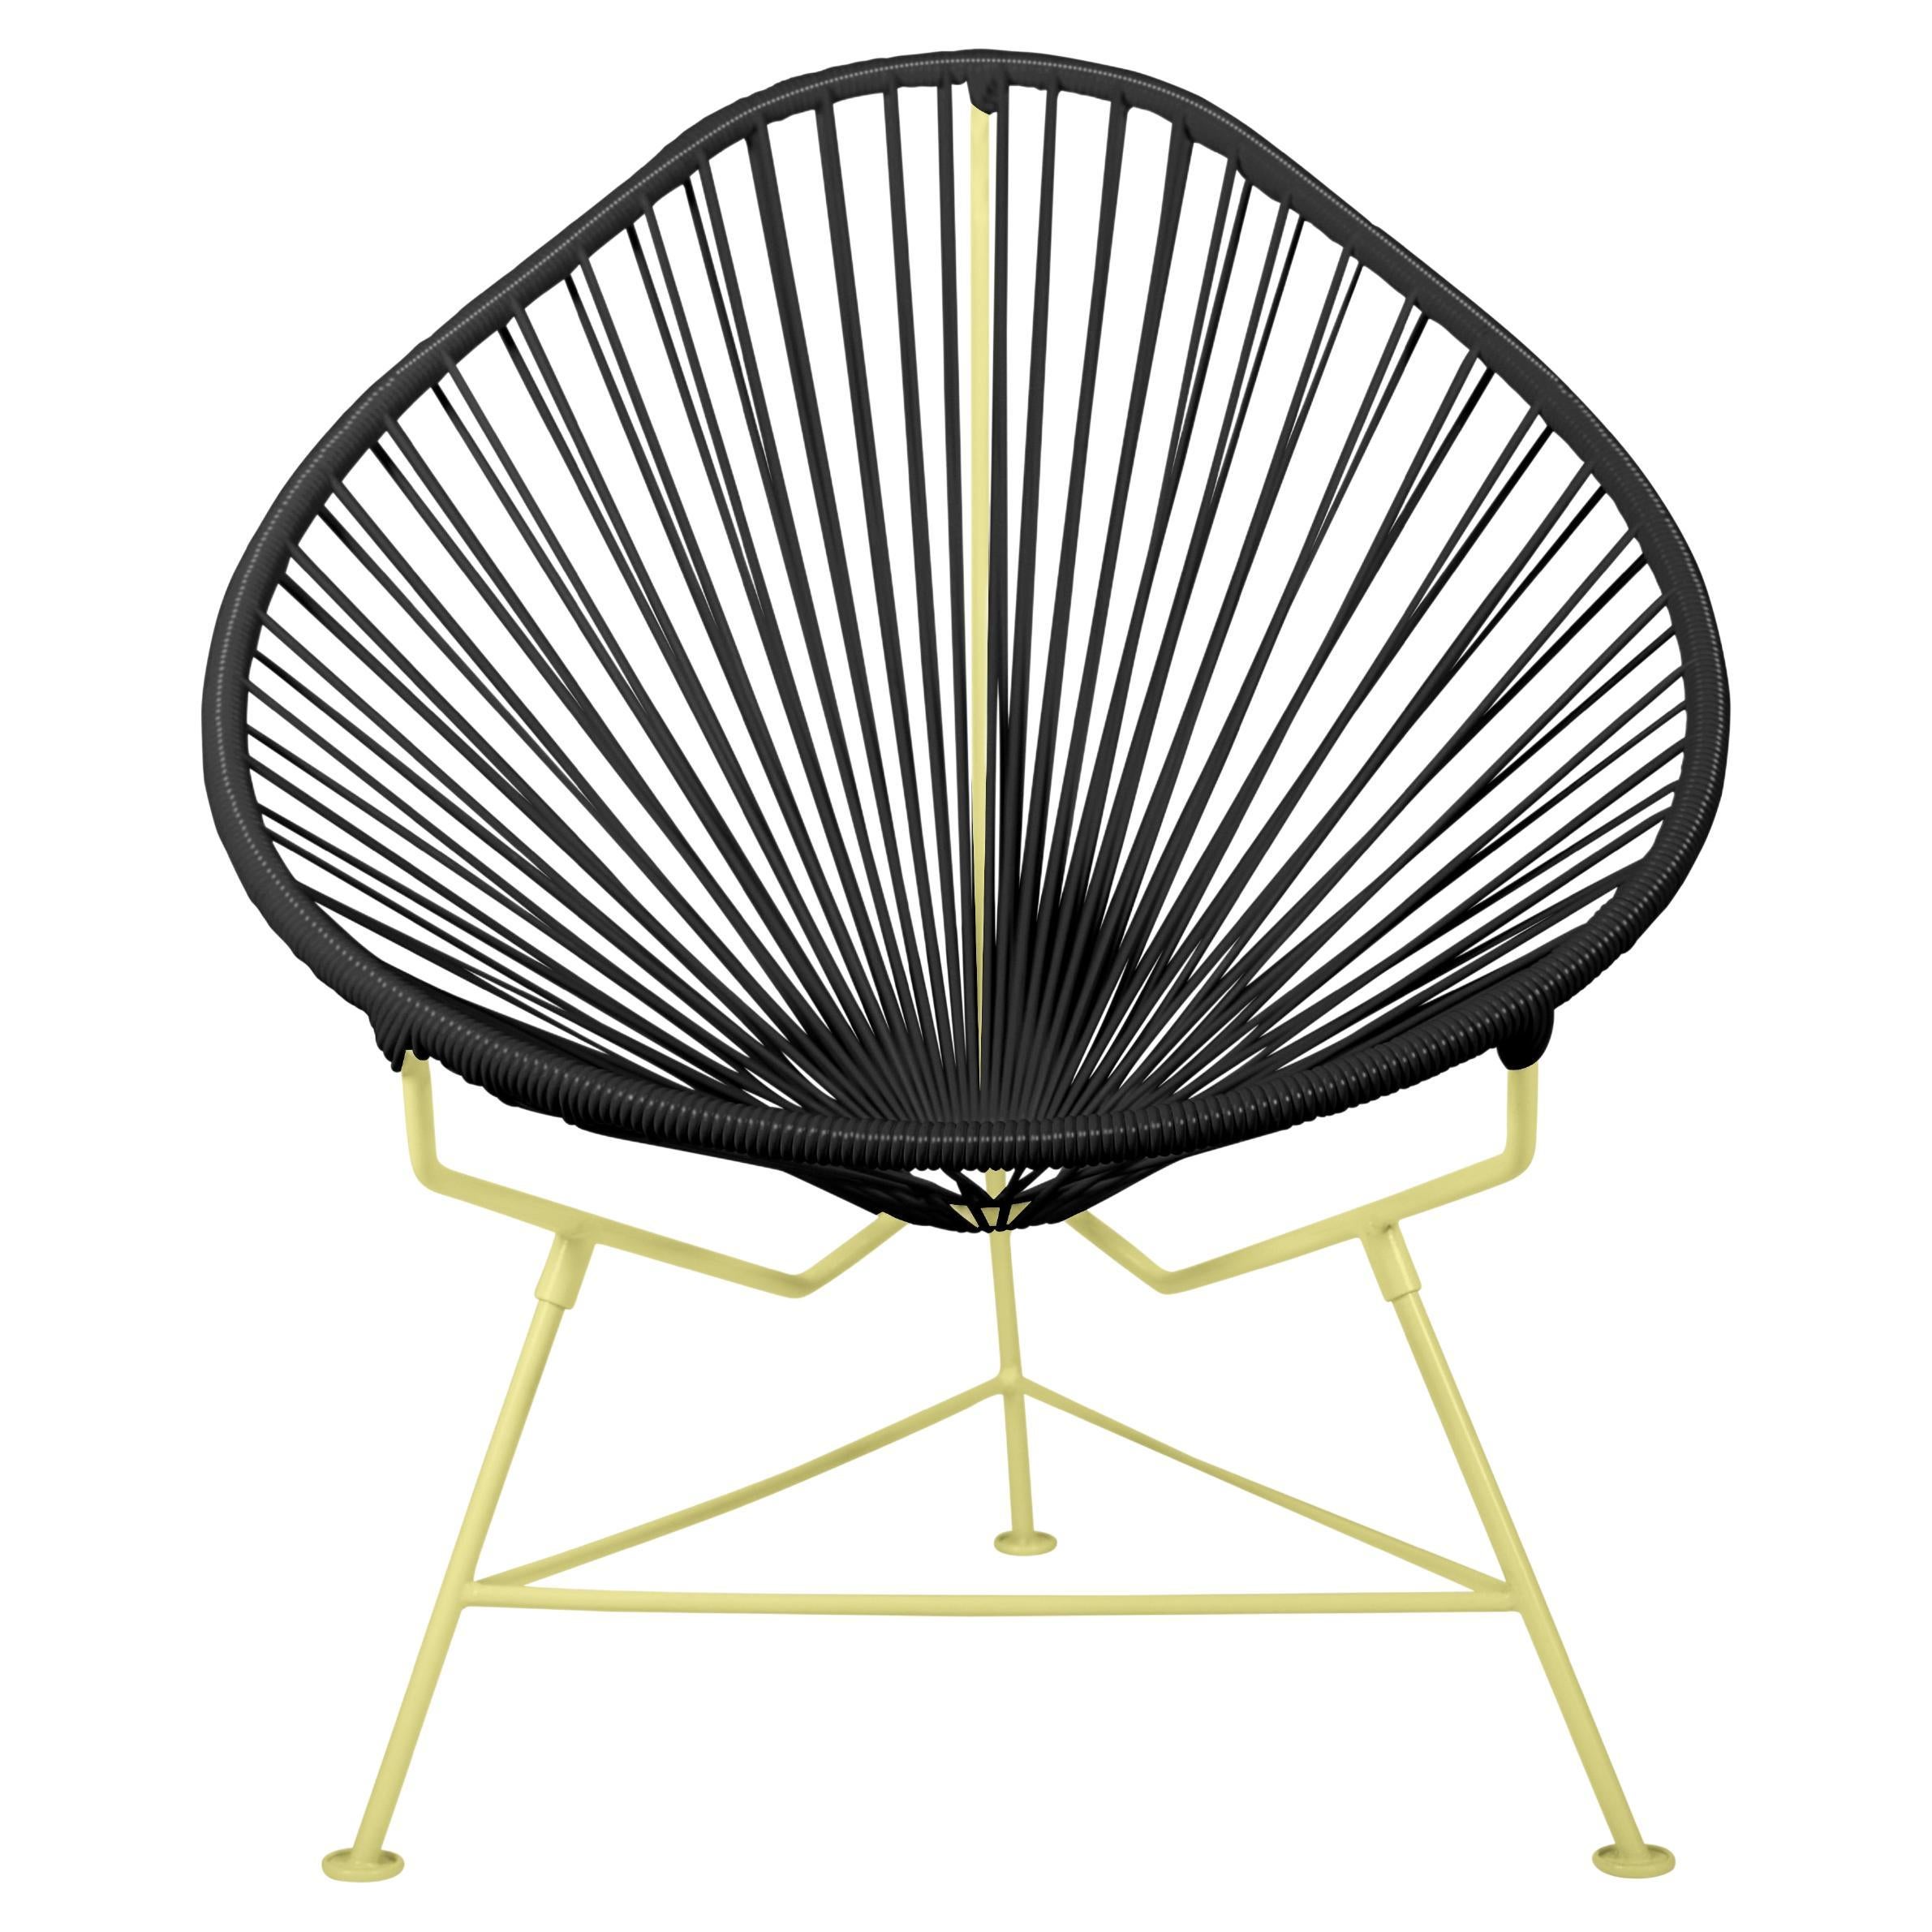 Innit Designs Acapulco Chair Black Weave on Yellow Frame For Sale